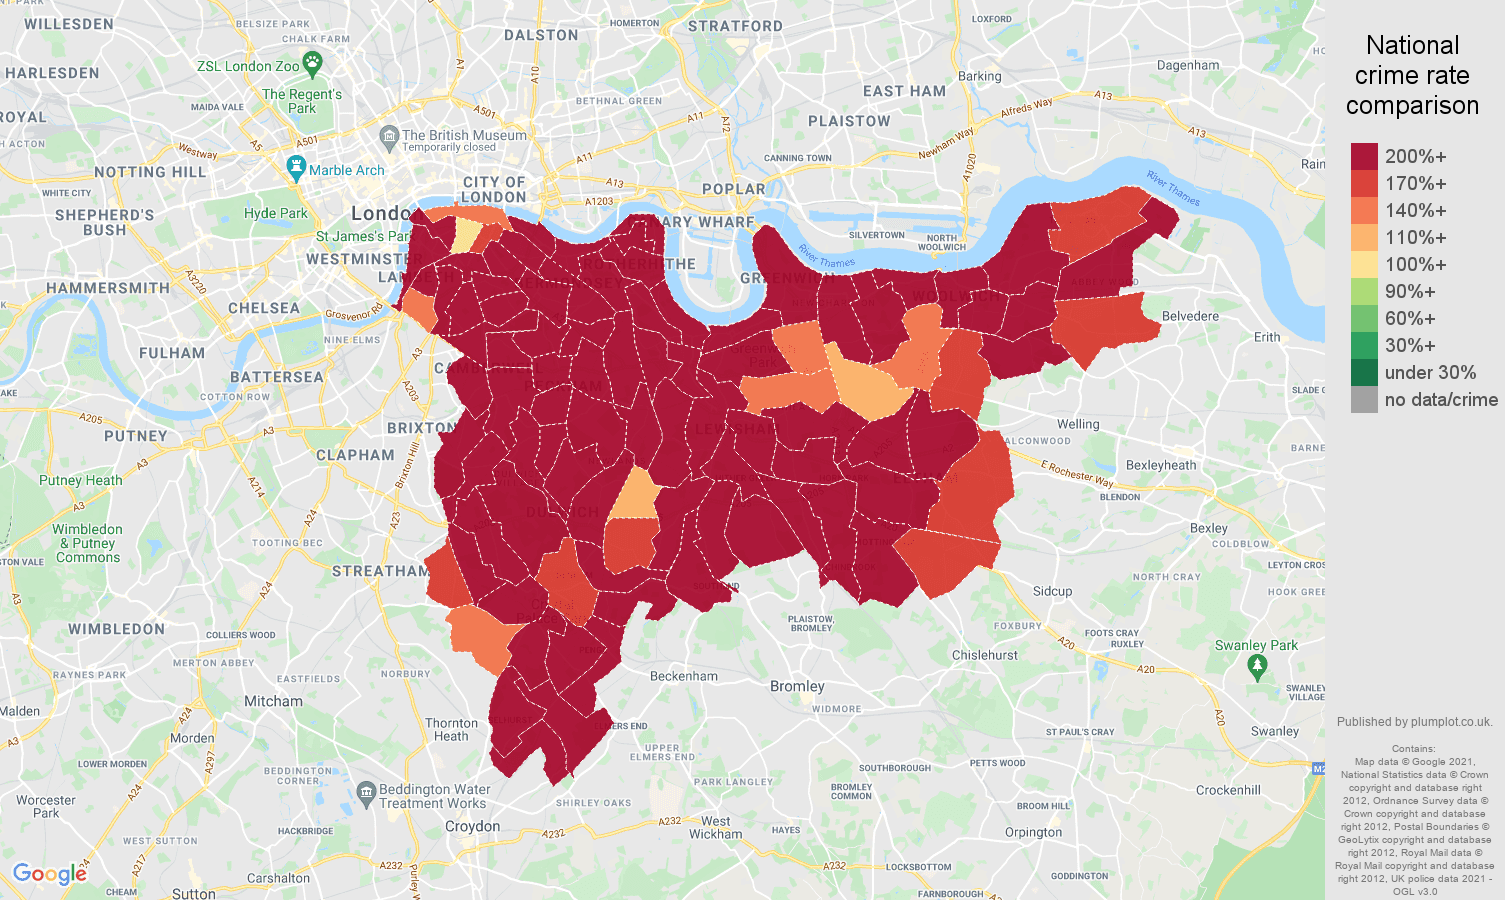 South East London robbery crime rate comparison map